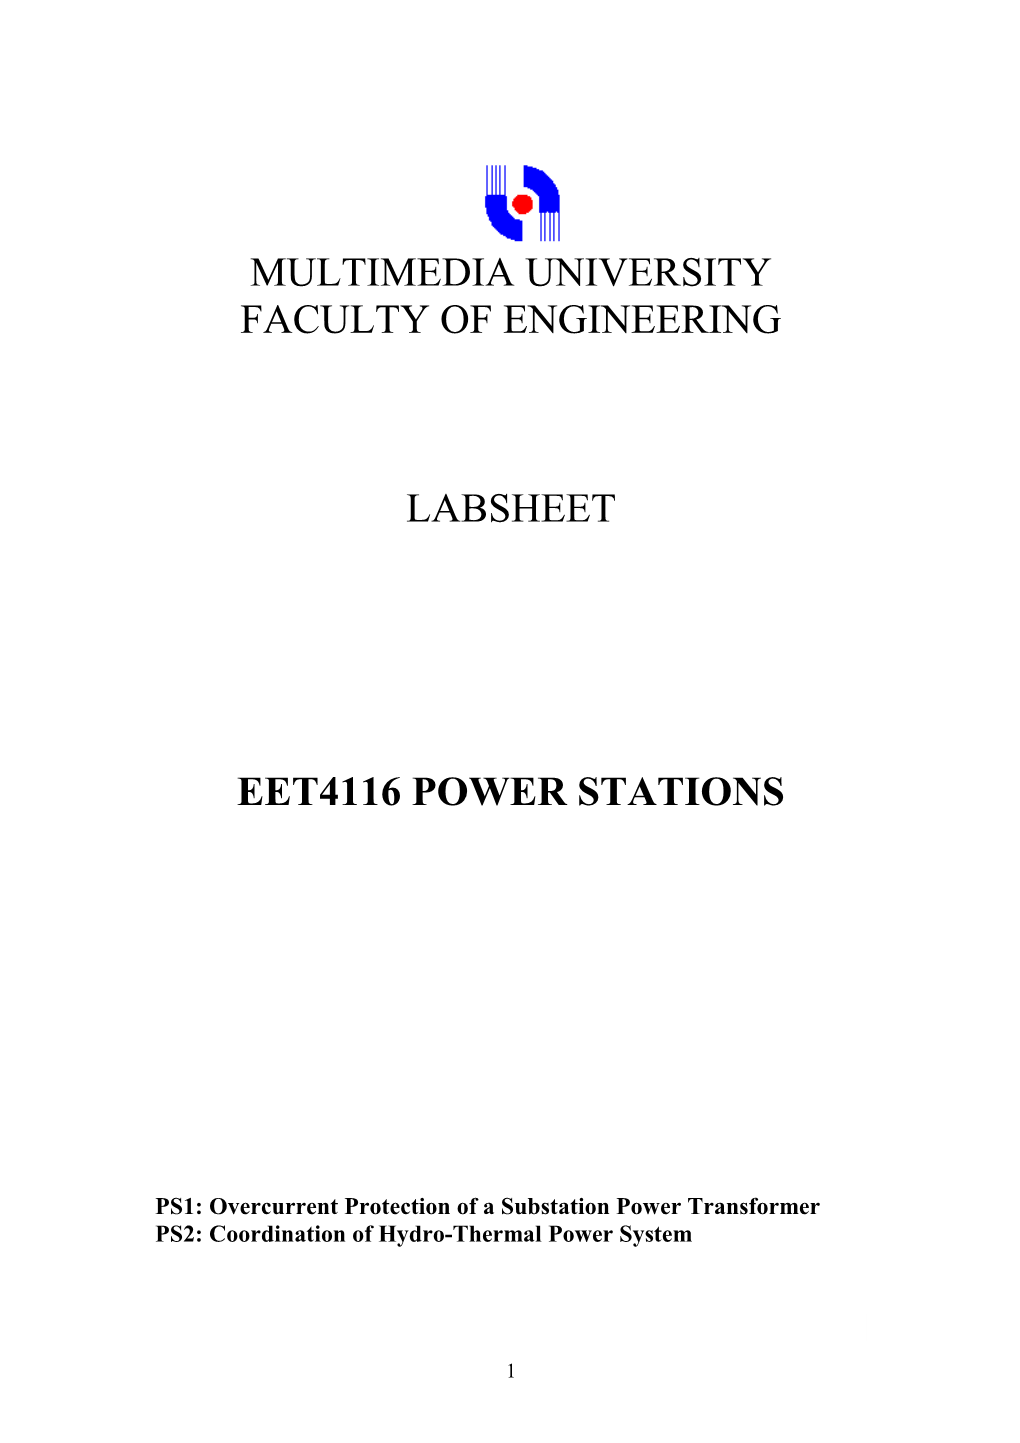 Overcurrent Protection of a Substation Power Transformer